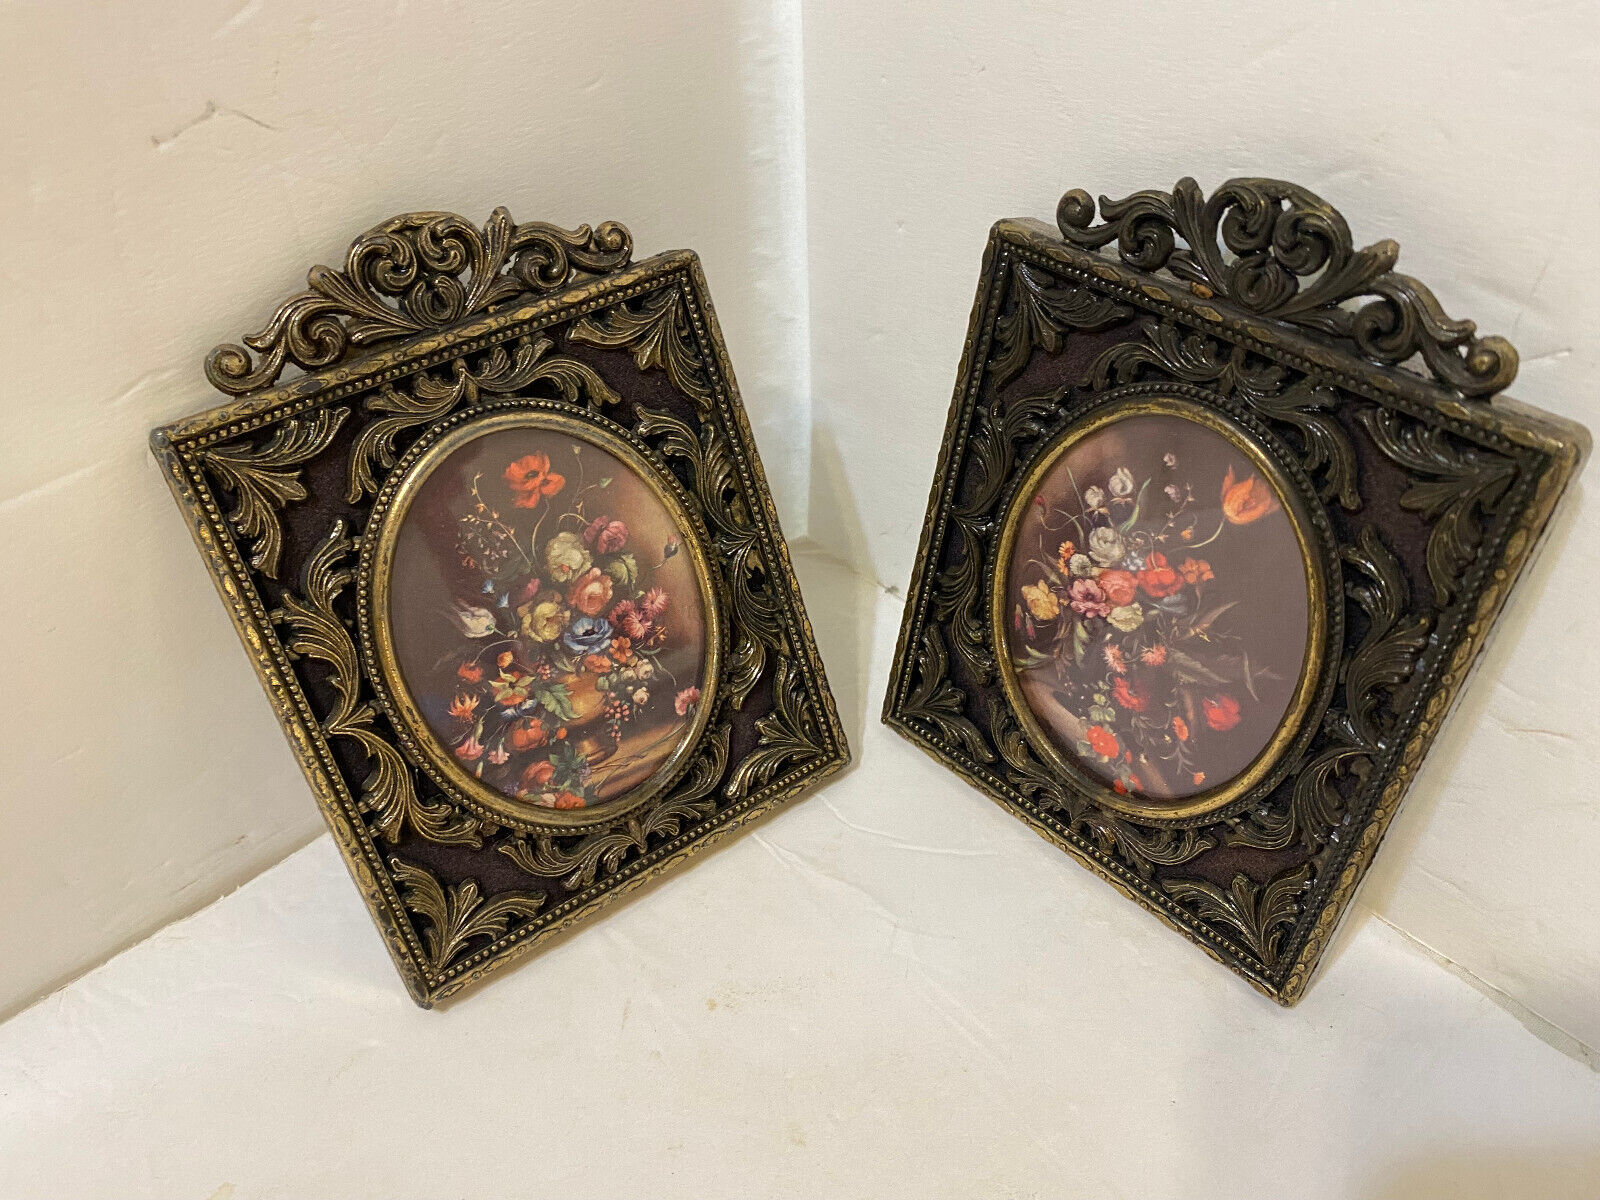 2 VINTAGE ORNATE METAL FRAMES WITH FLORAL BOUQUETS IN EACH 4X5 1/2\